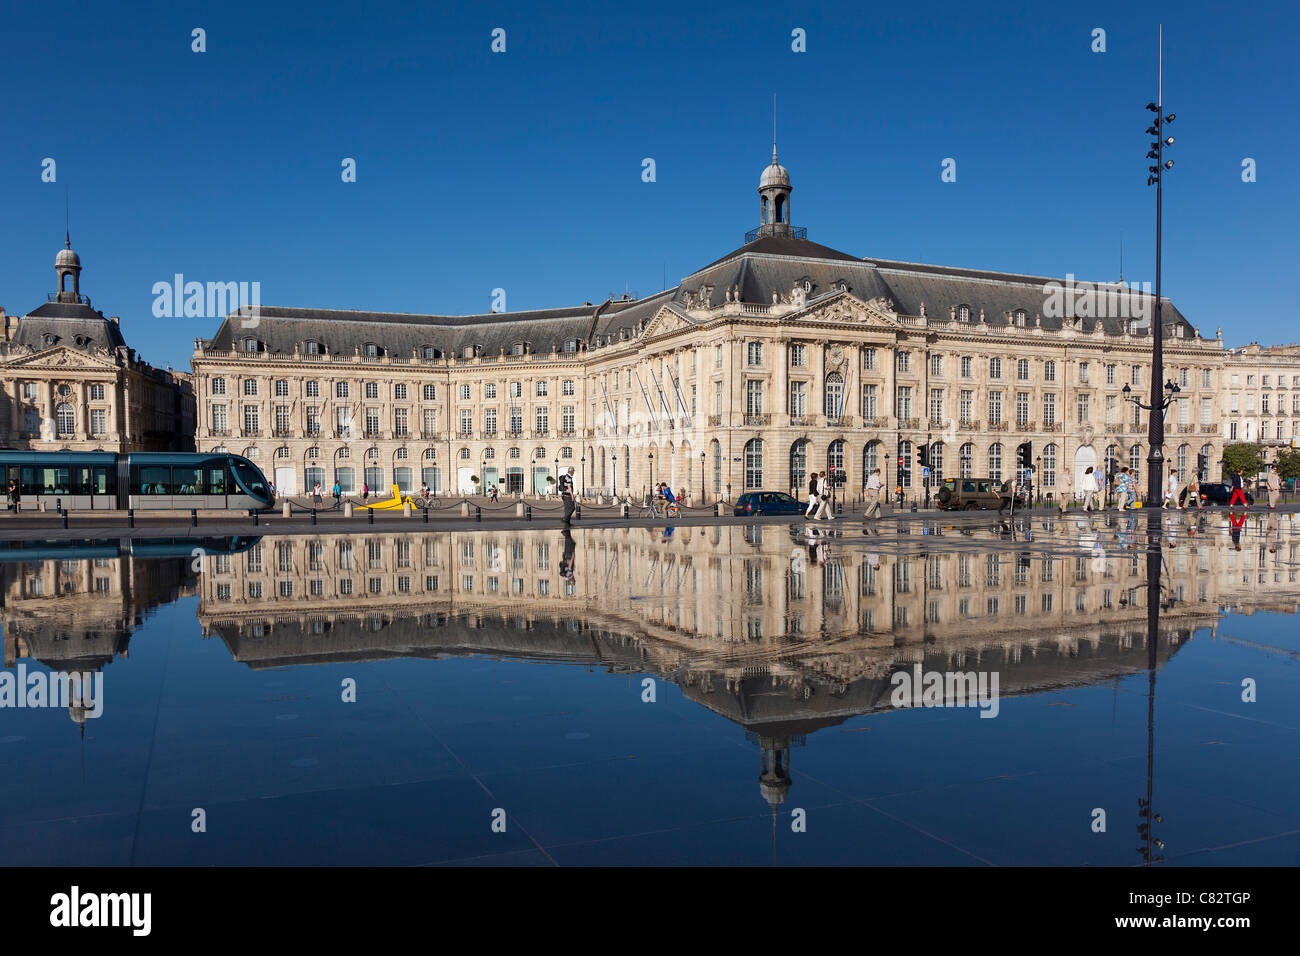 Square of the Bourse, Aquitaine, France Stock Photo